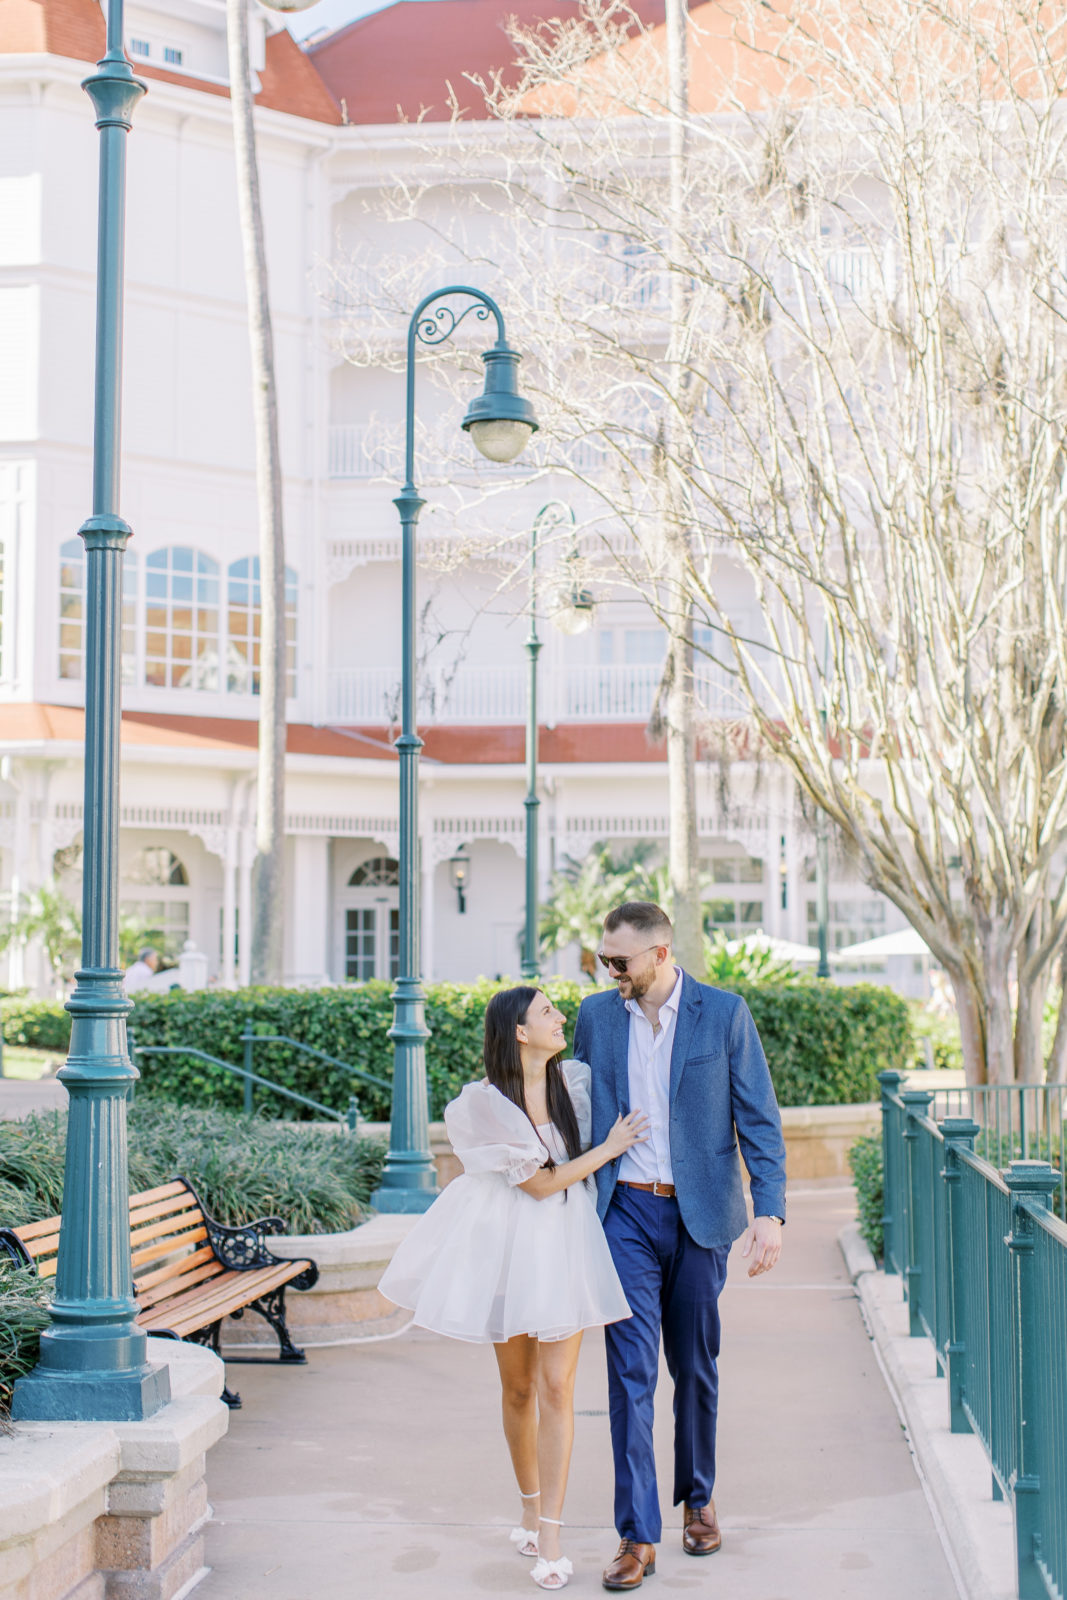 Disney Grand Floridian Engagement Session with groom in blue suit and bride in stylish selkie dress